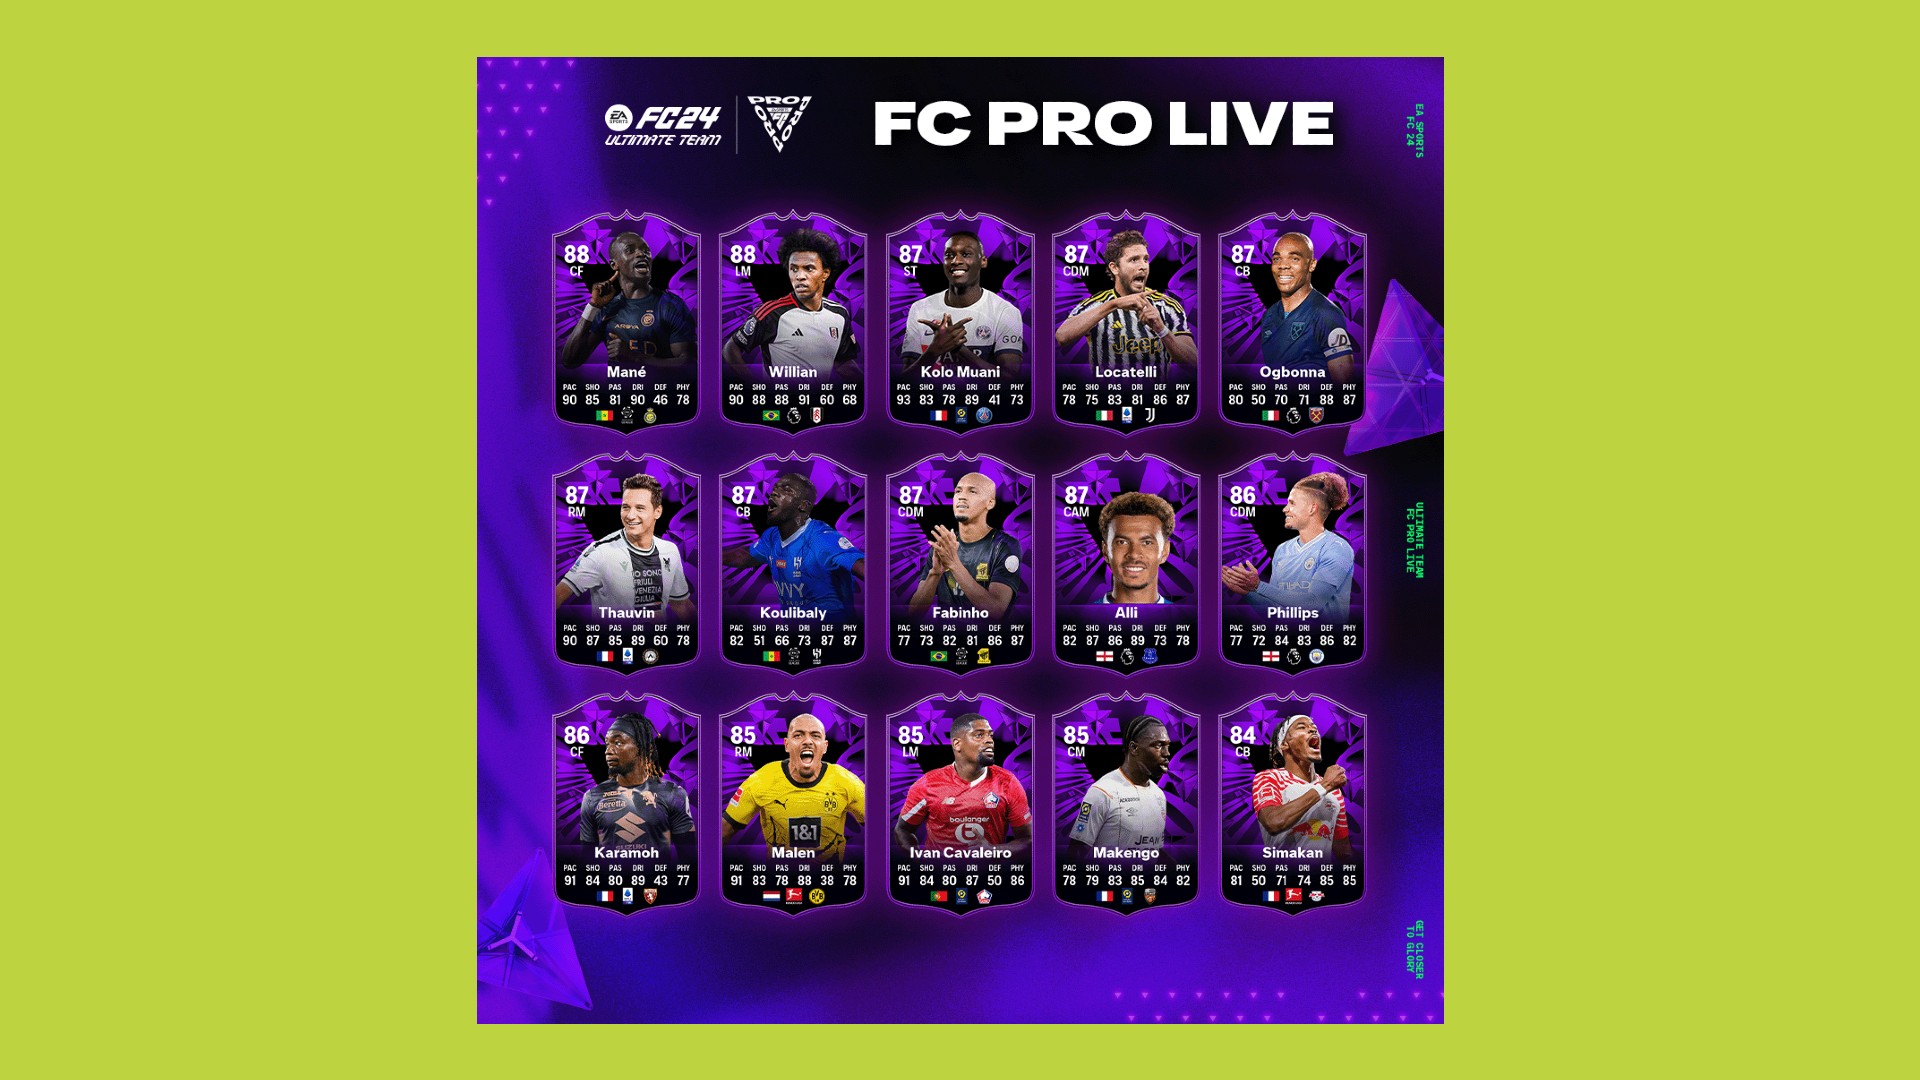 FUT Sheriff - NEW PROMO COMING SOON!👀 Will feature